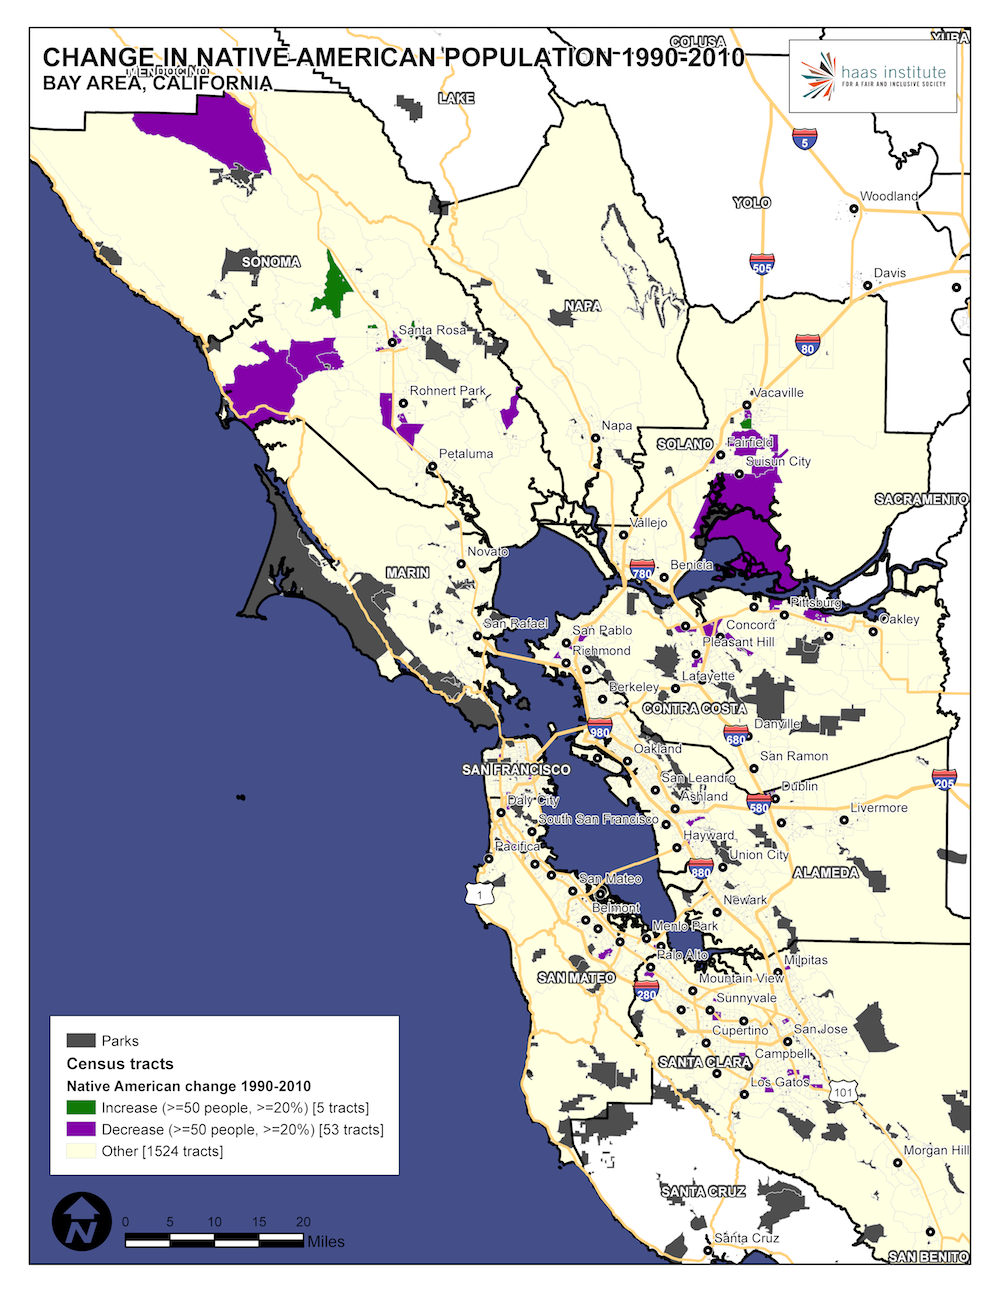 Map shows change in Bay Area Native American population from 1990 to 2010